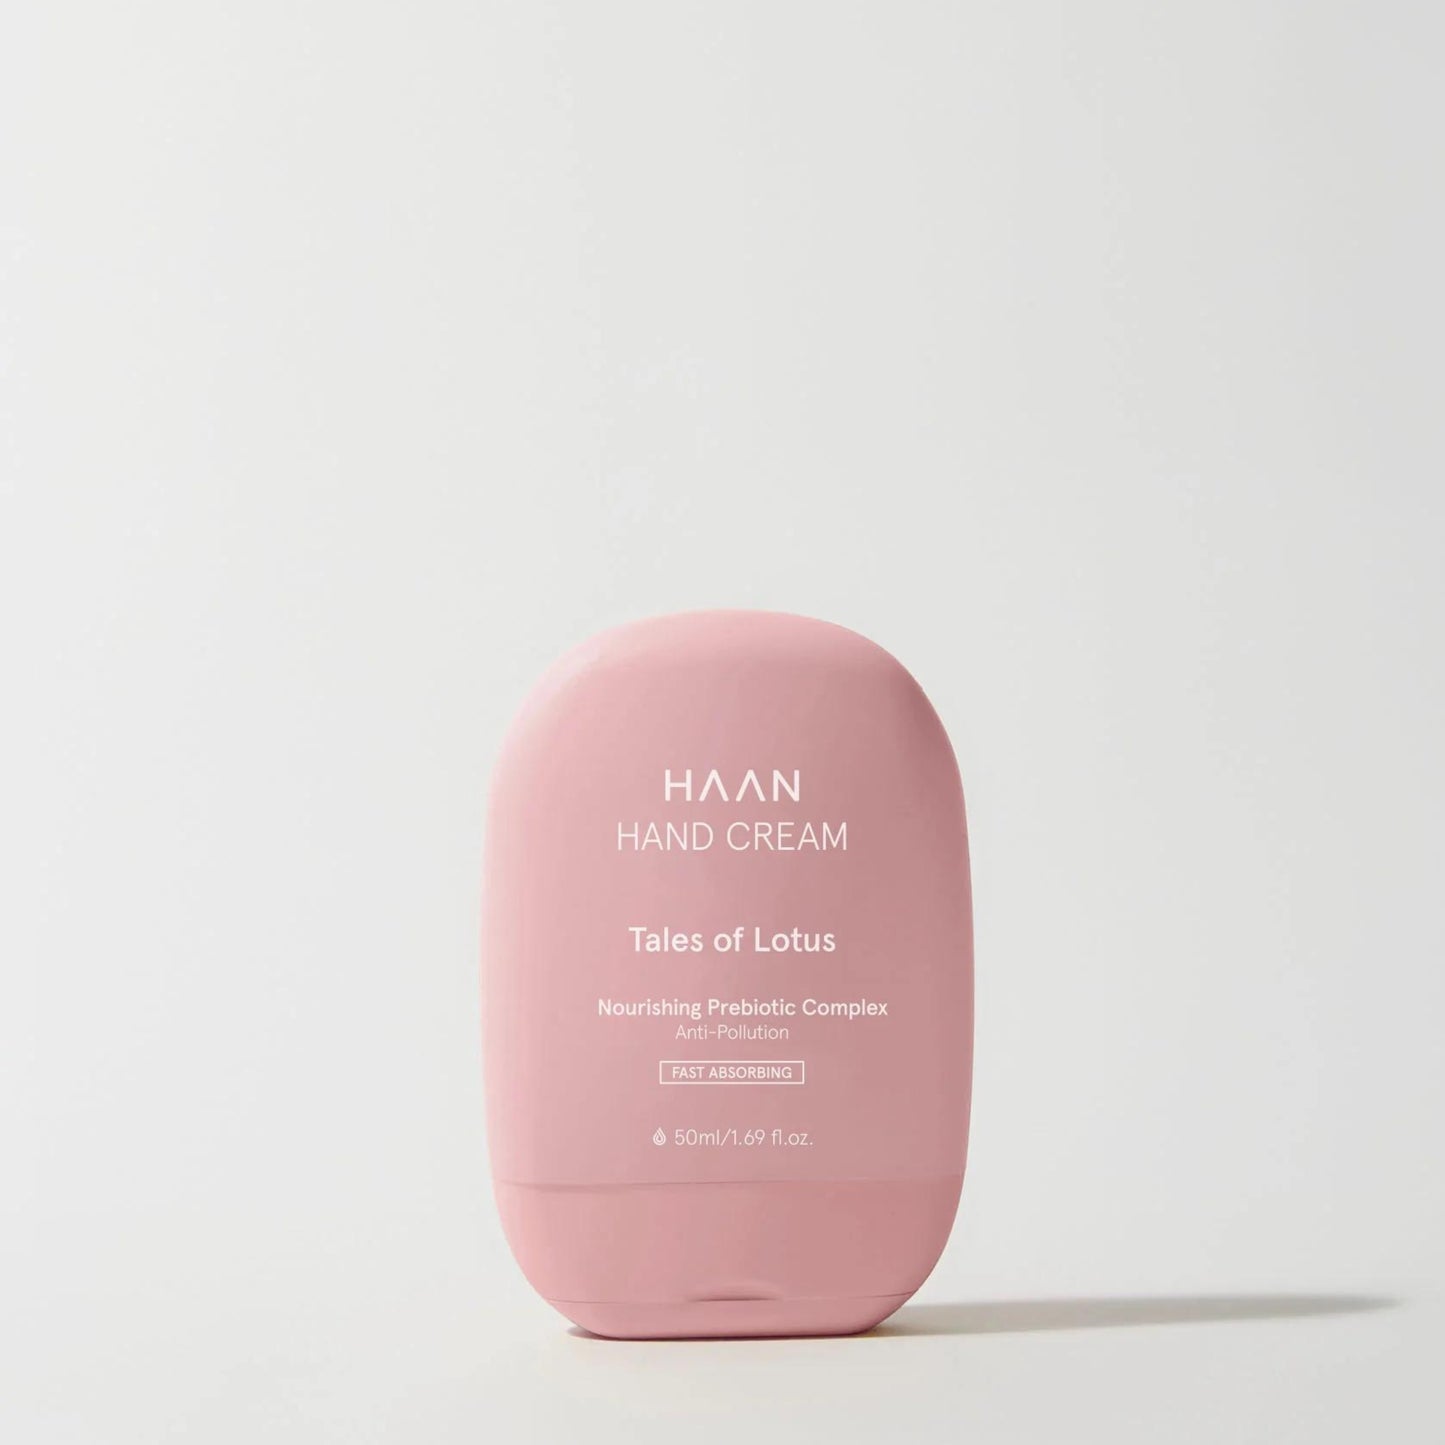 Tales of Lotus Hand Cream by HAAN